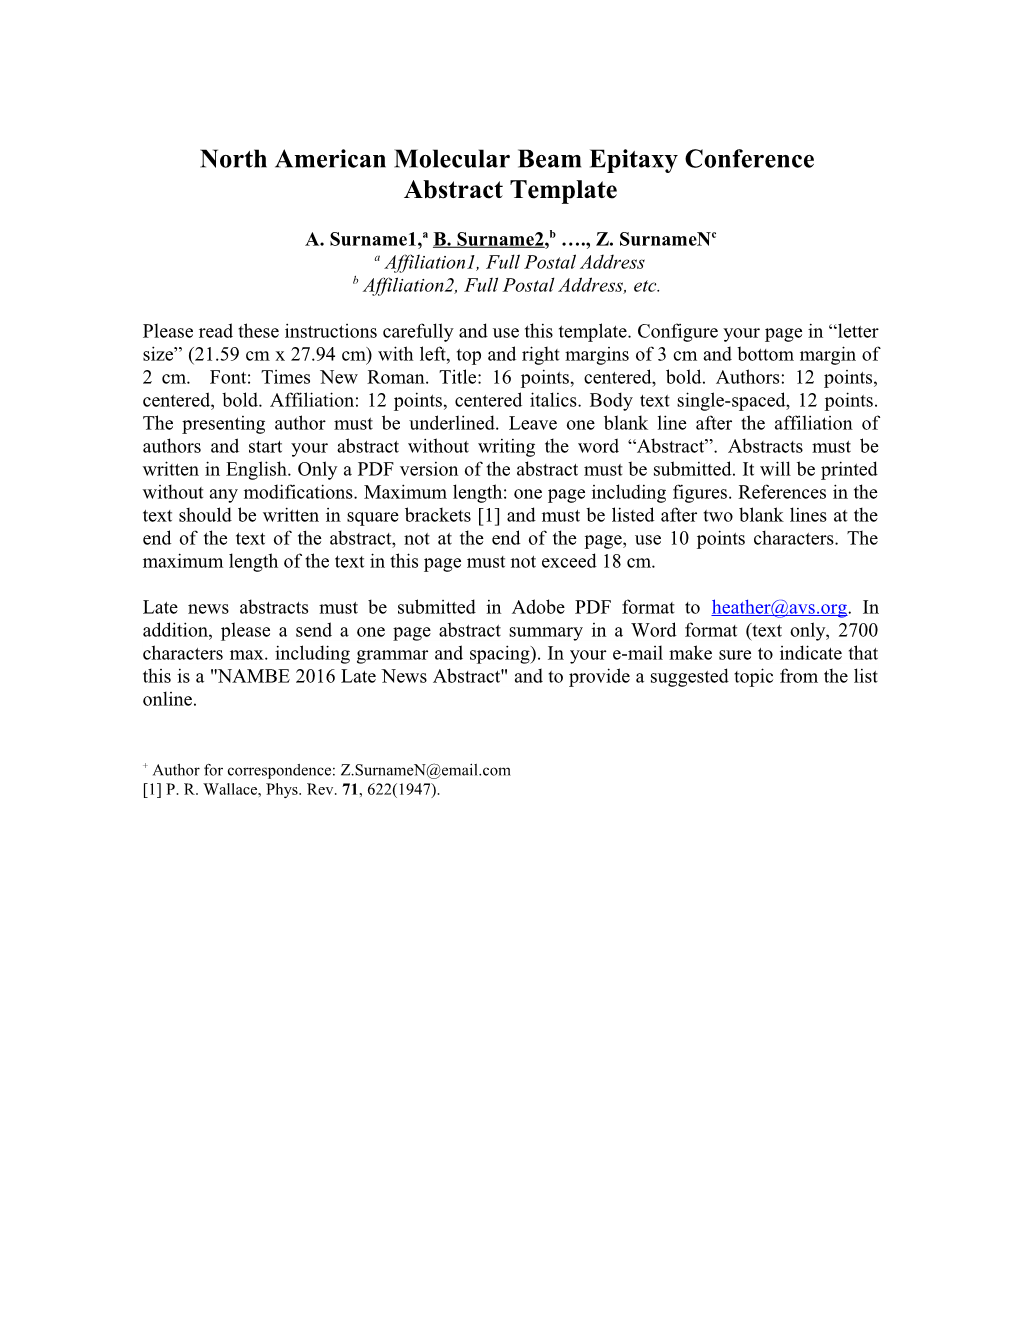 North American Molecular Beam Epitaxy Conference Abstract Template